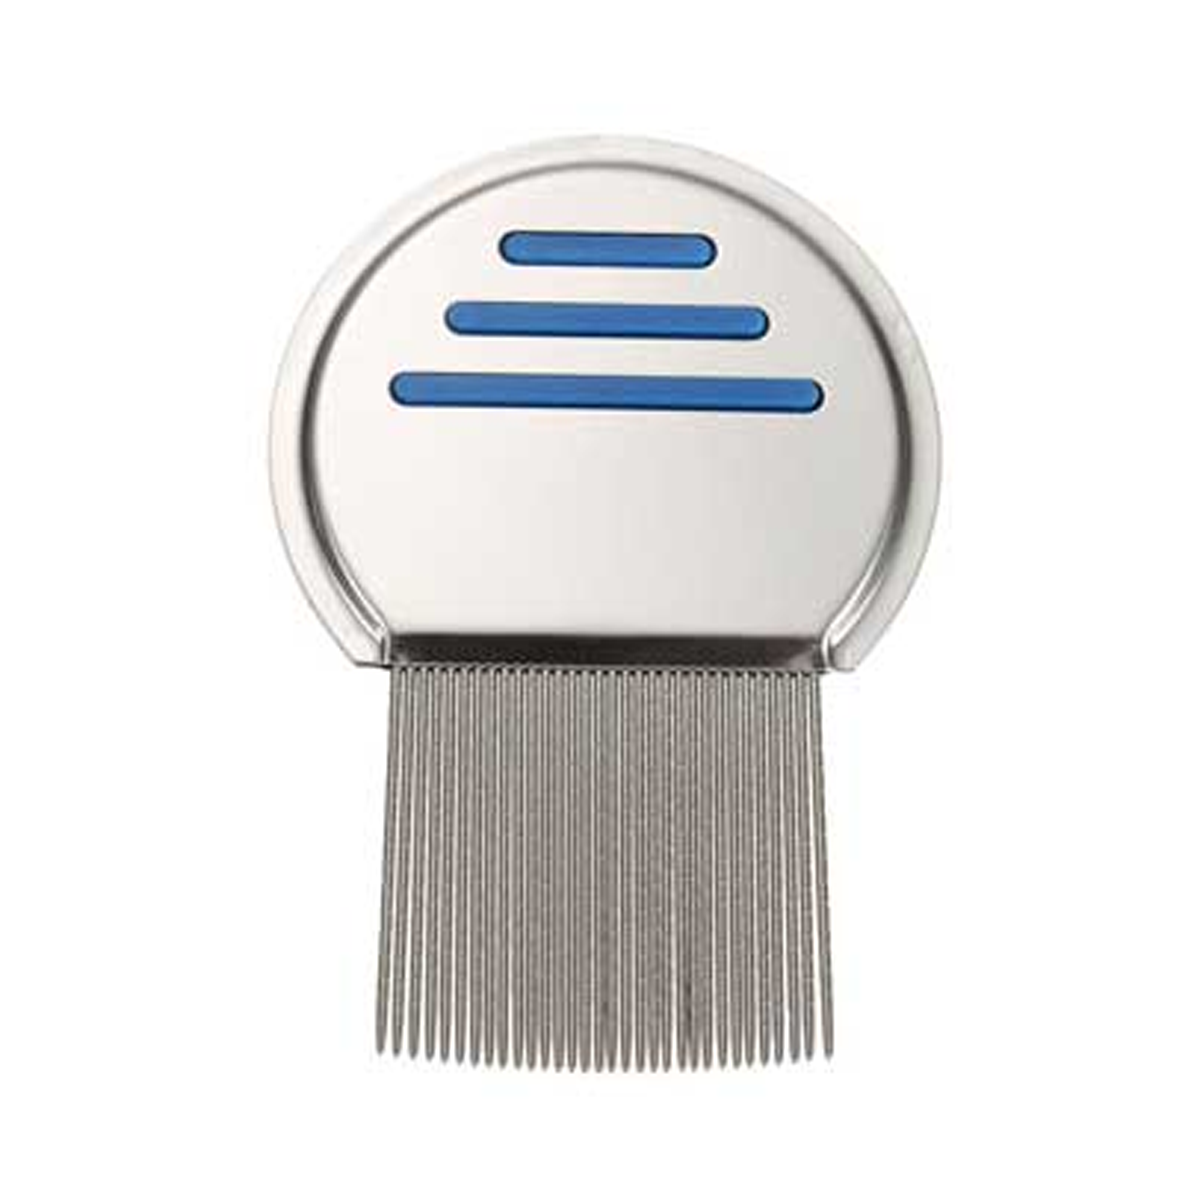 Linda Nit Stainless Steel Lice Comb Silver/Blue